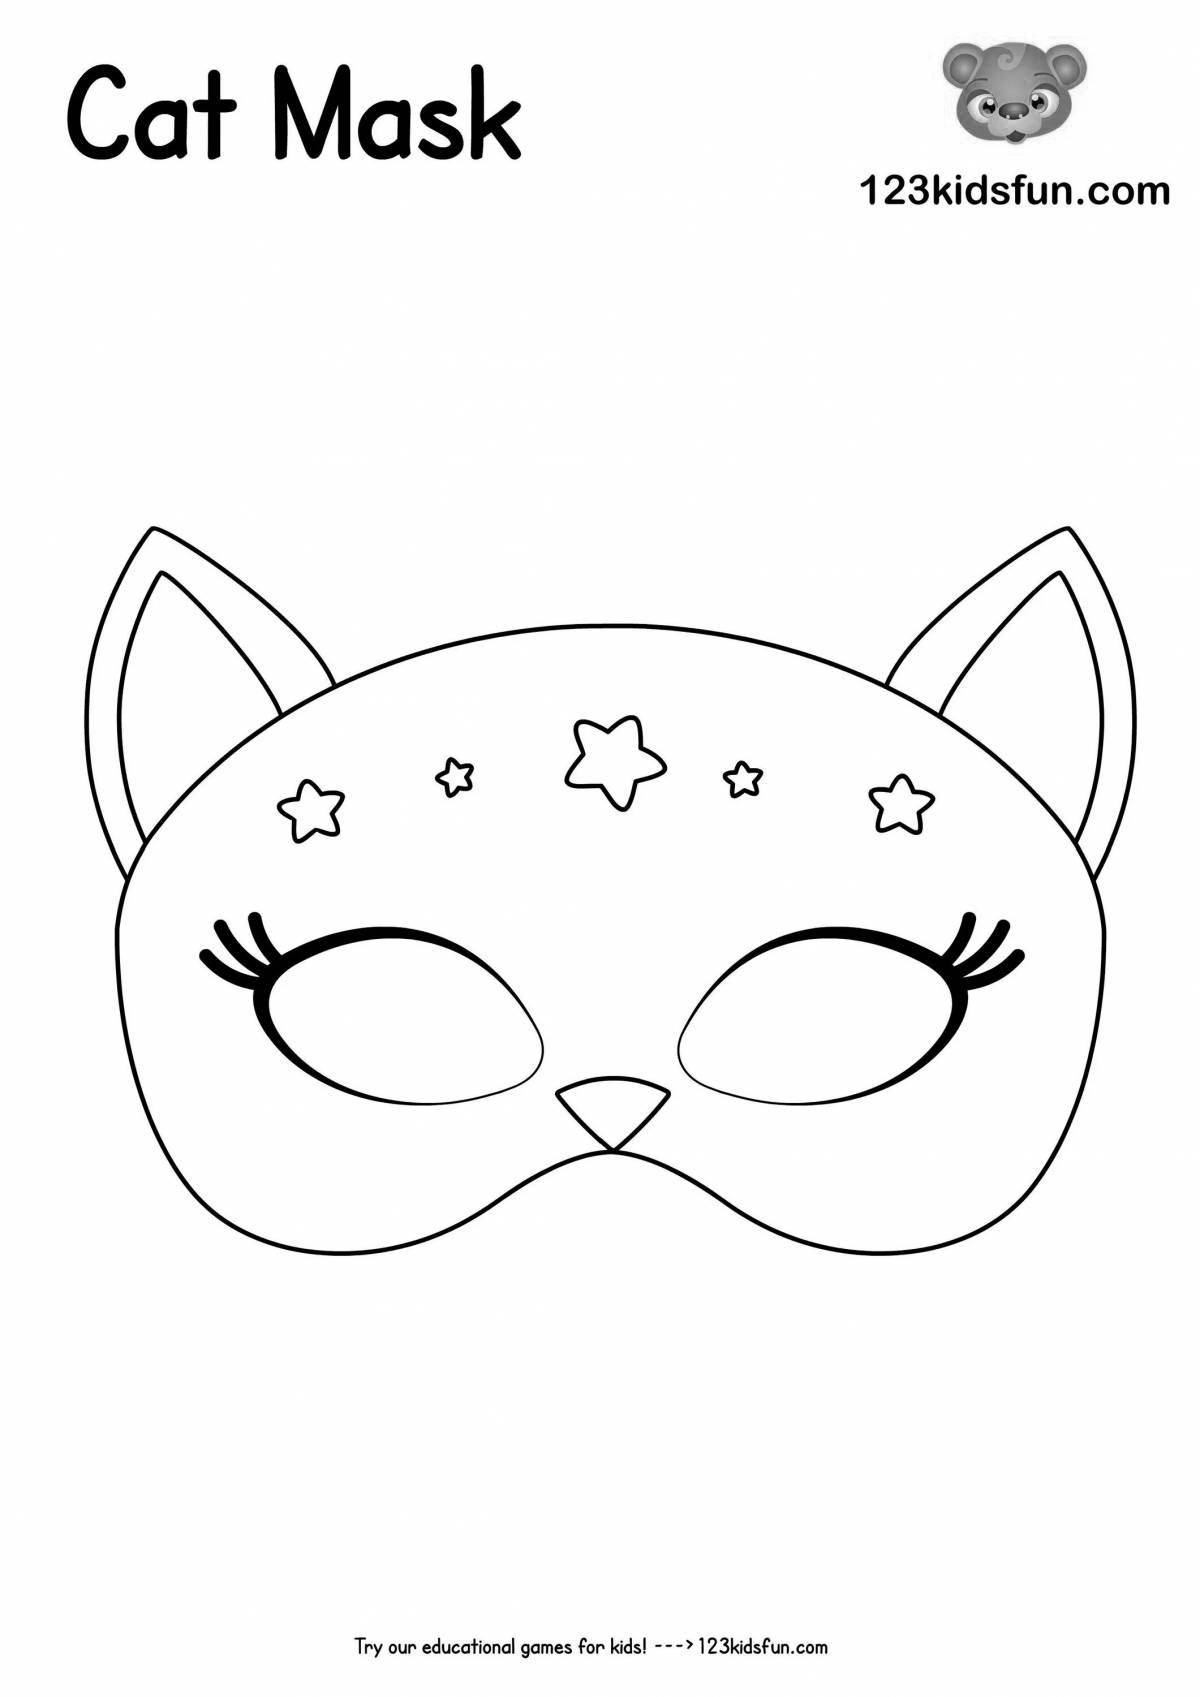 Soft cat mask coloring page